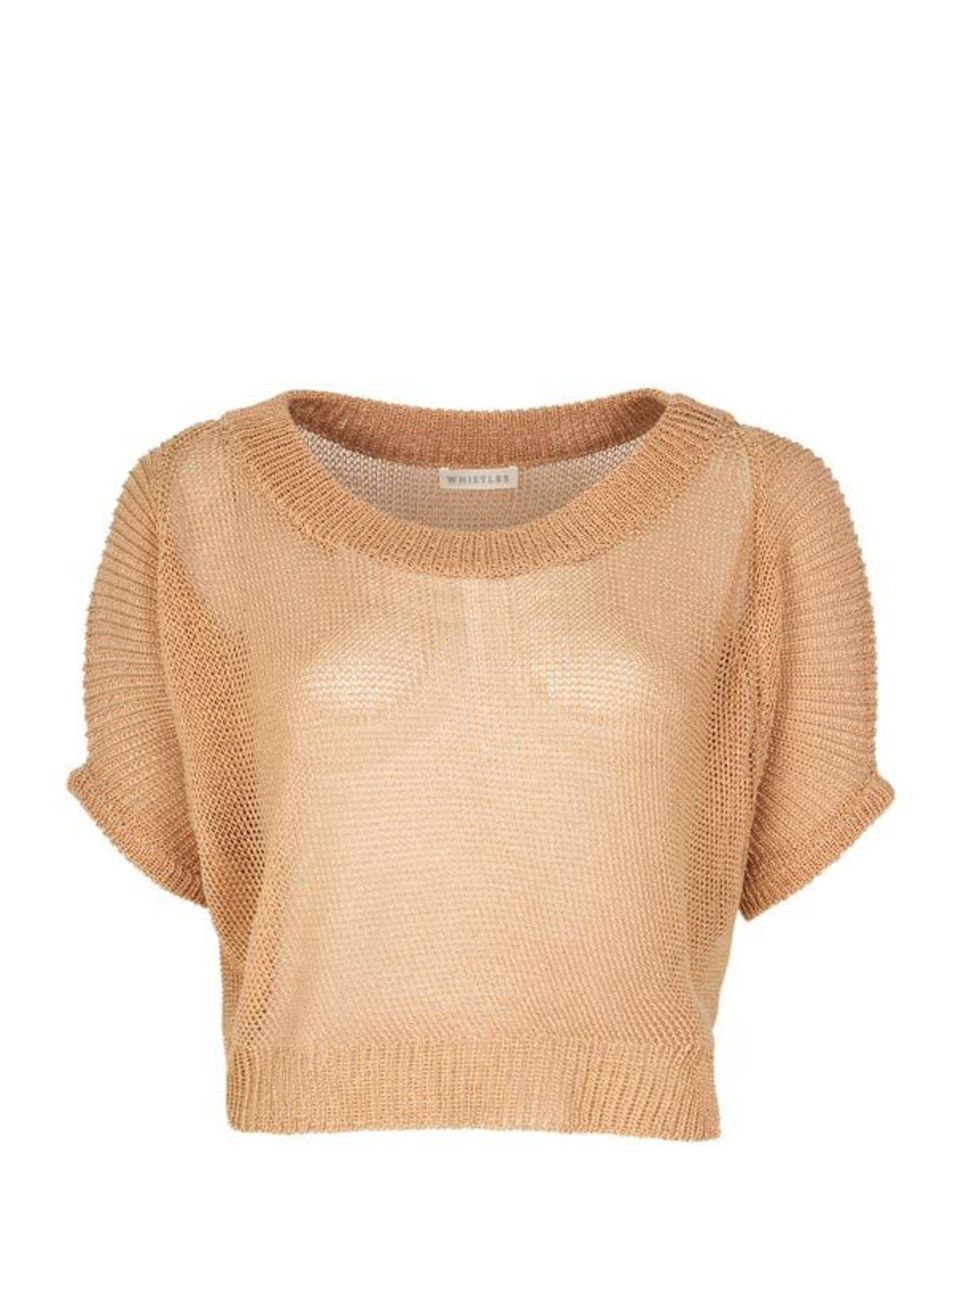 <p>Cropped knitted sweater, £195, by <a href="http://www.whistles.co.uk/fcp/categorylist/dept/shop?resetFilters=true">Whistles</a> </p>